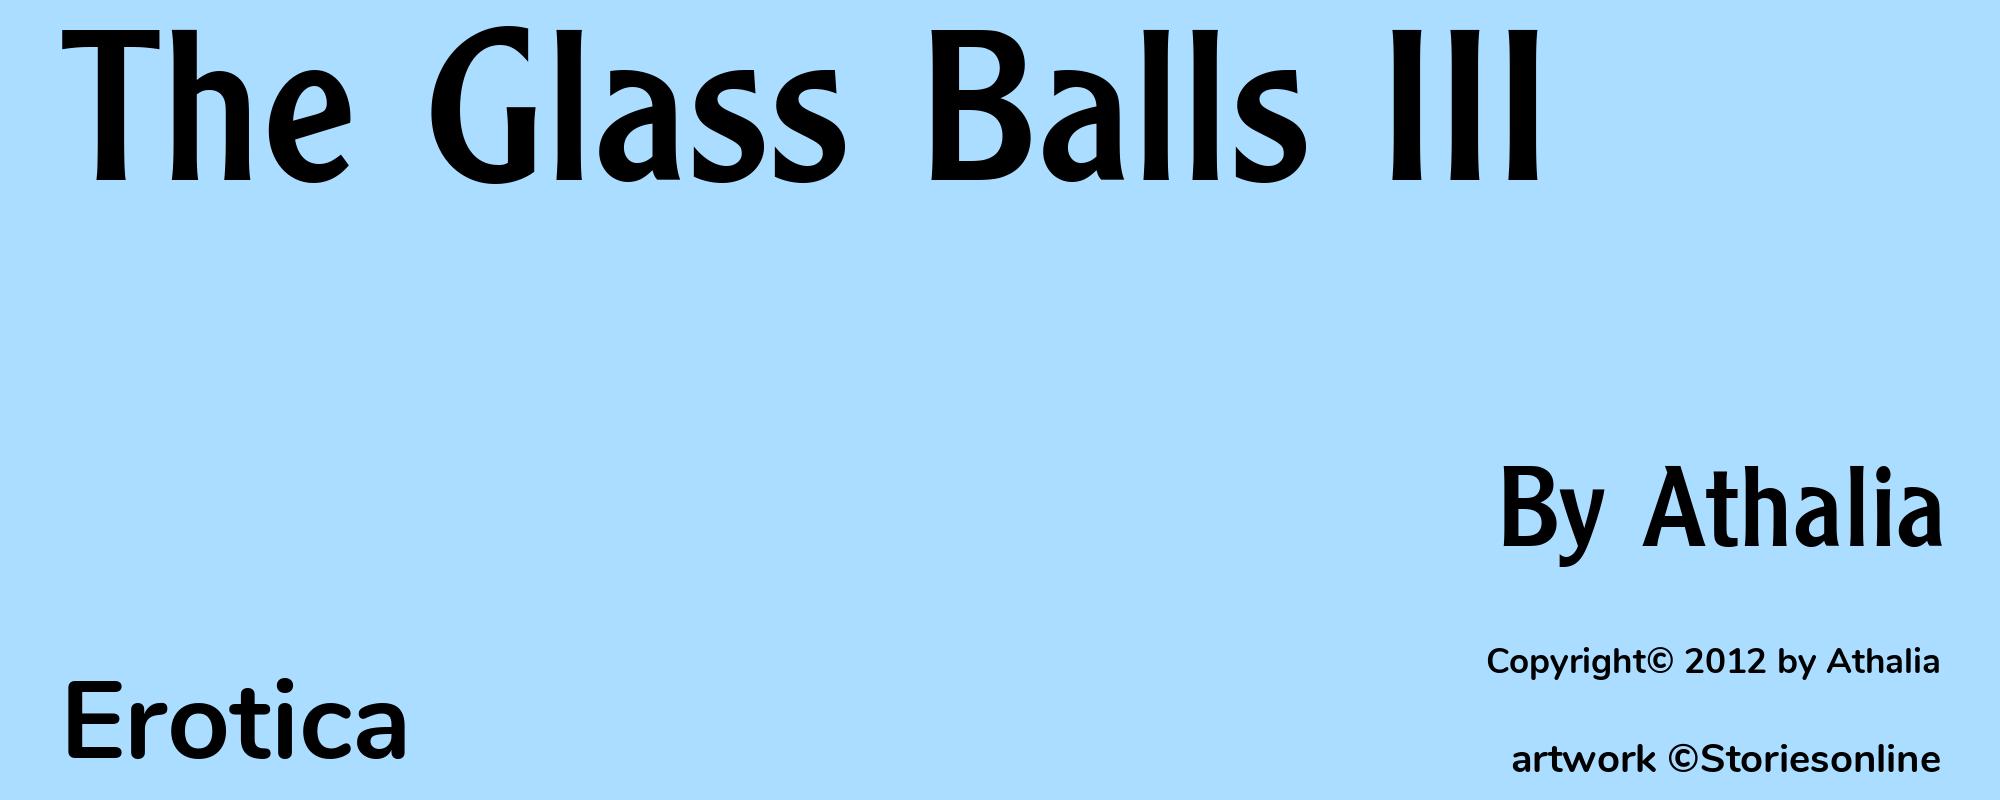 The Glass Balls III - Cover